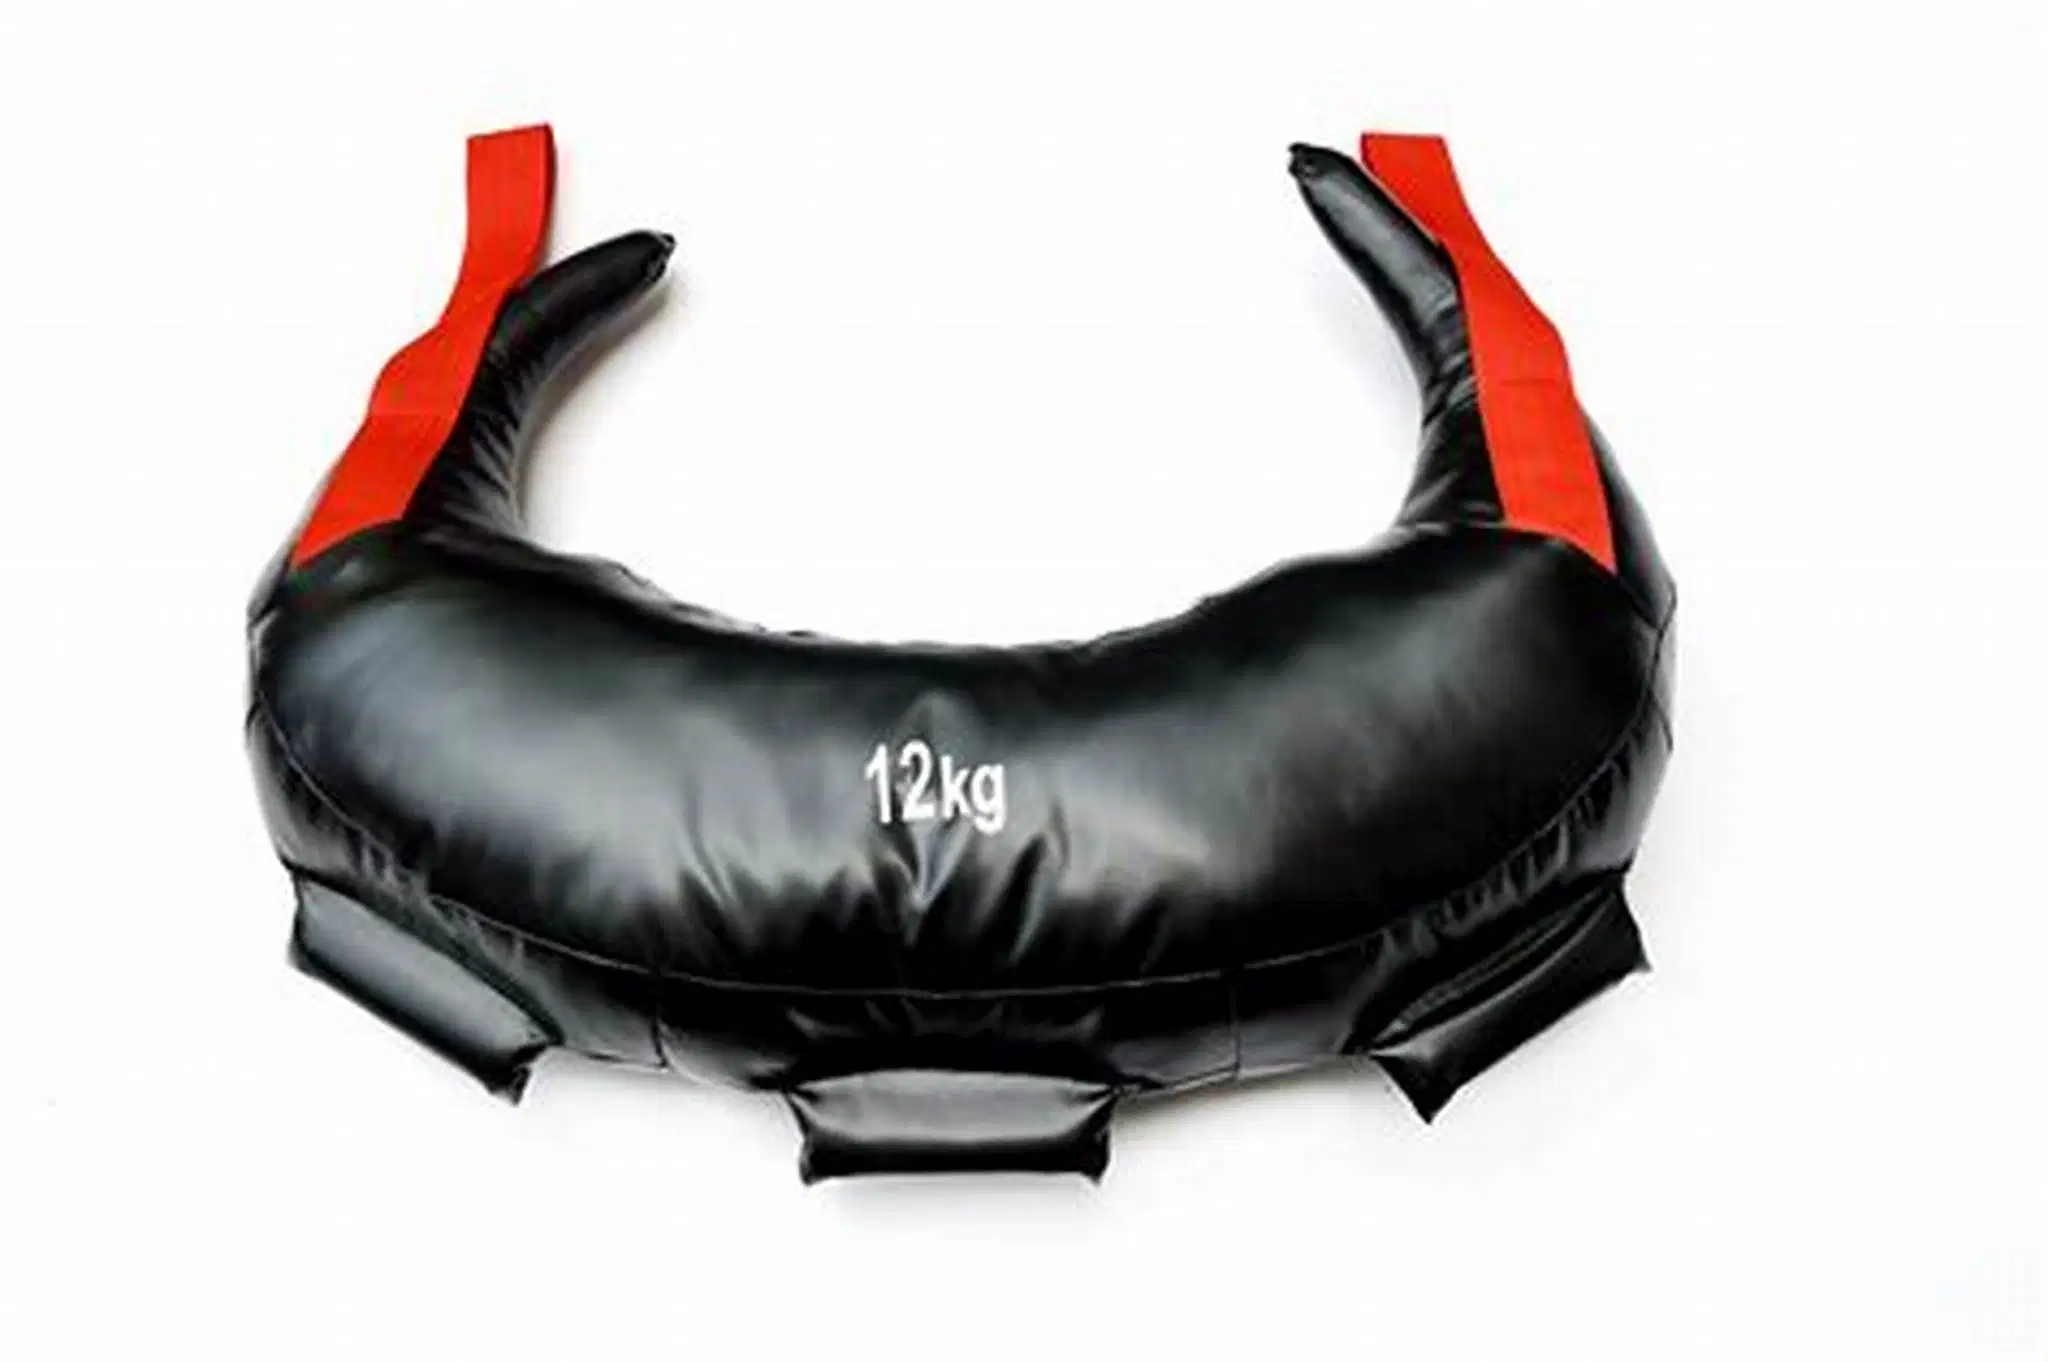 Accessories Gym Equipment Bulgarian Bag Free Weight